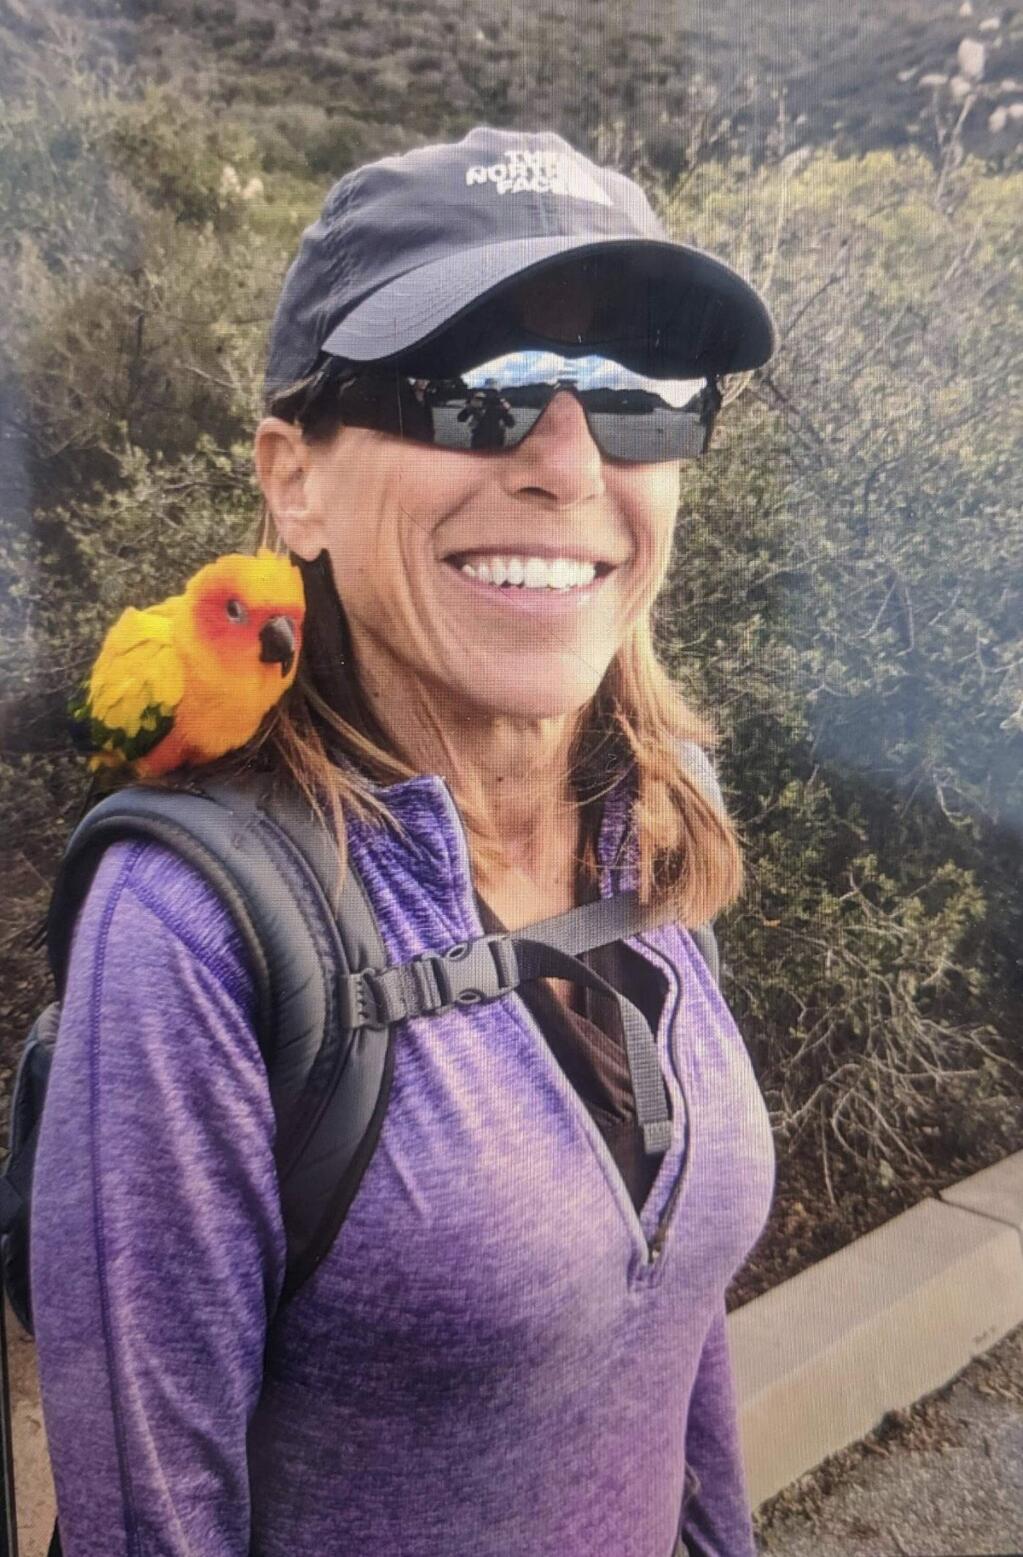 This undated photo released by the Inyo County, Calif., Sheriff's Office shows Sheryl Powell, who is missing. Inyo County Sheriff's Office spokeswoman Carma Roper says 60-year-old Sheryl Powell, of Huntington Beach, Calif., remains missing Monday, July 15, 2019. Her husband reported Friday that they selected a site in the Grandview Campground and she took their dog for a walk while he repositioned their Jeep. Roper says investigators have determined the husband is not connected to her disappearance. (Inyo County Sheriff's Office via AP)